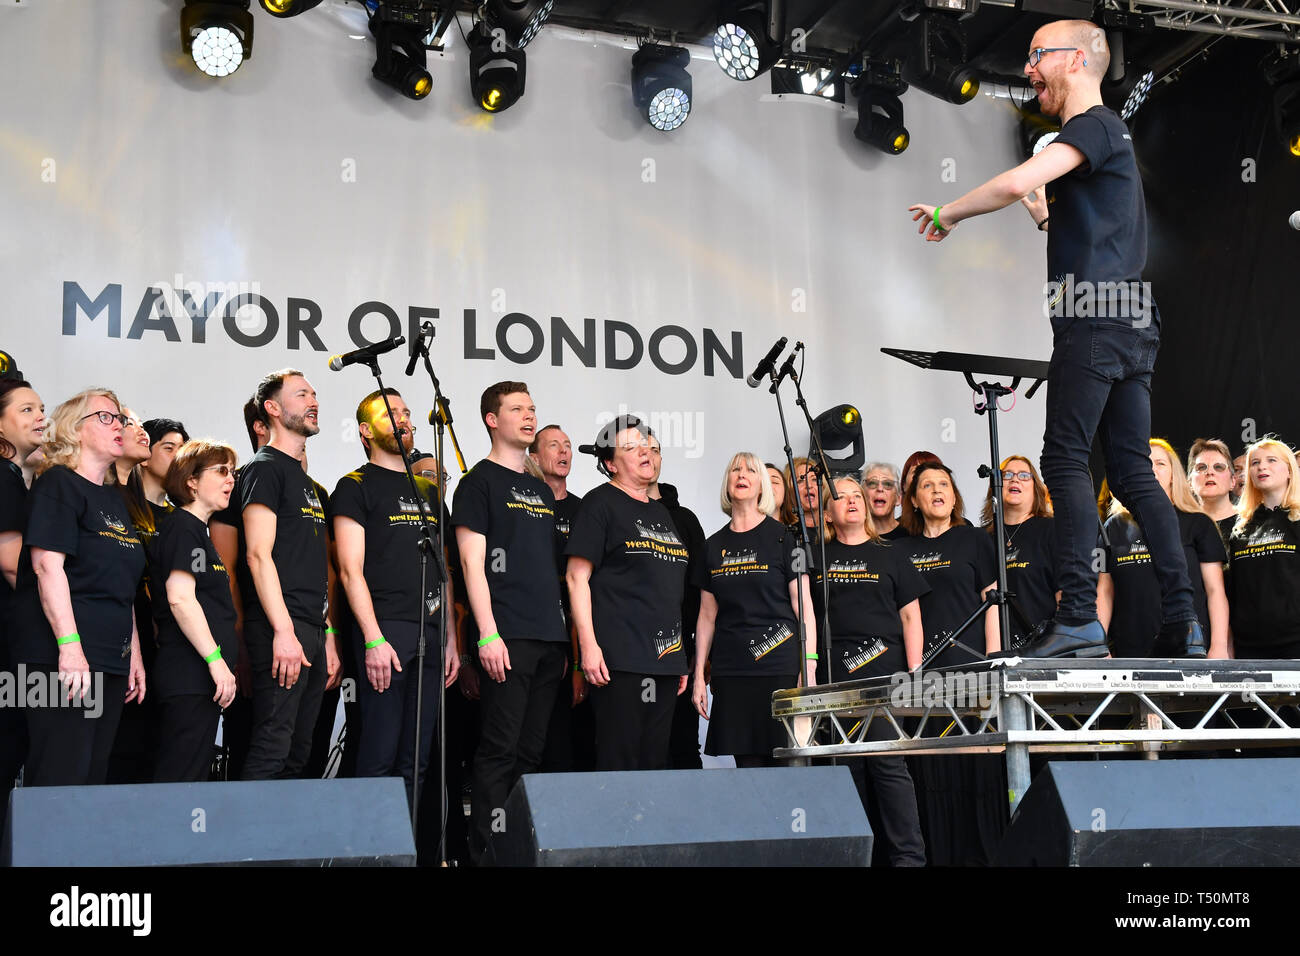 London, UK. 20th April, 2019.Westend Music Choir perfroms at the Feast of St George to celebrate English culture with music and English food stalls in Trafalgar Square on 20 April 2019, London, UK. Credit: Picture Capital/Alamy Live News Stock Photo